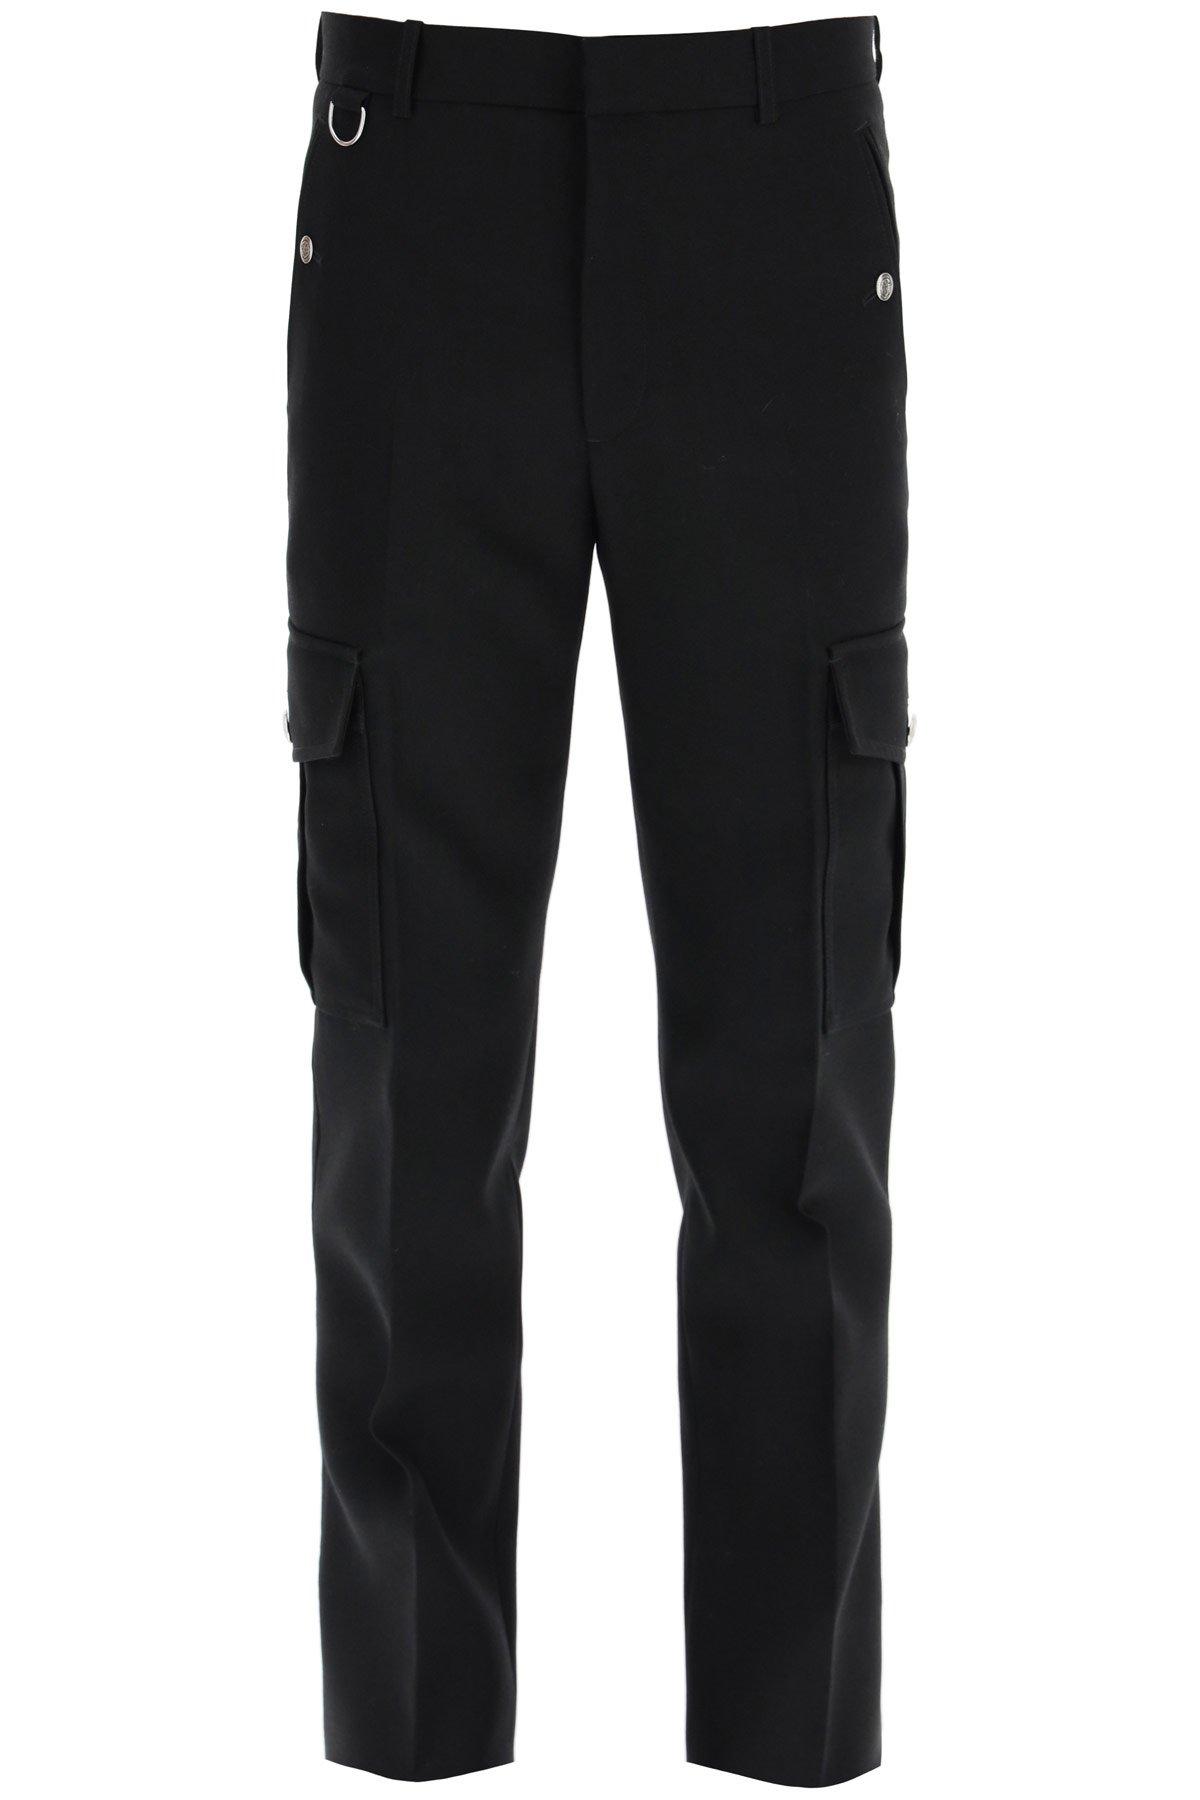 Alexander McQueen Wool Military Trousers in Black for Men - Save 11% - Lyst